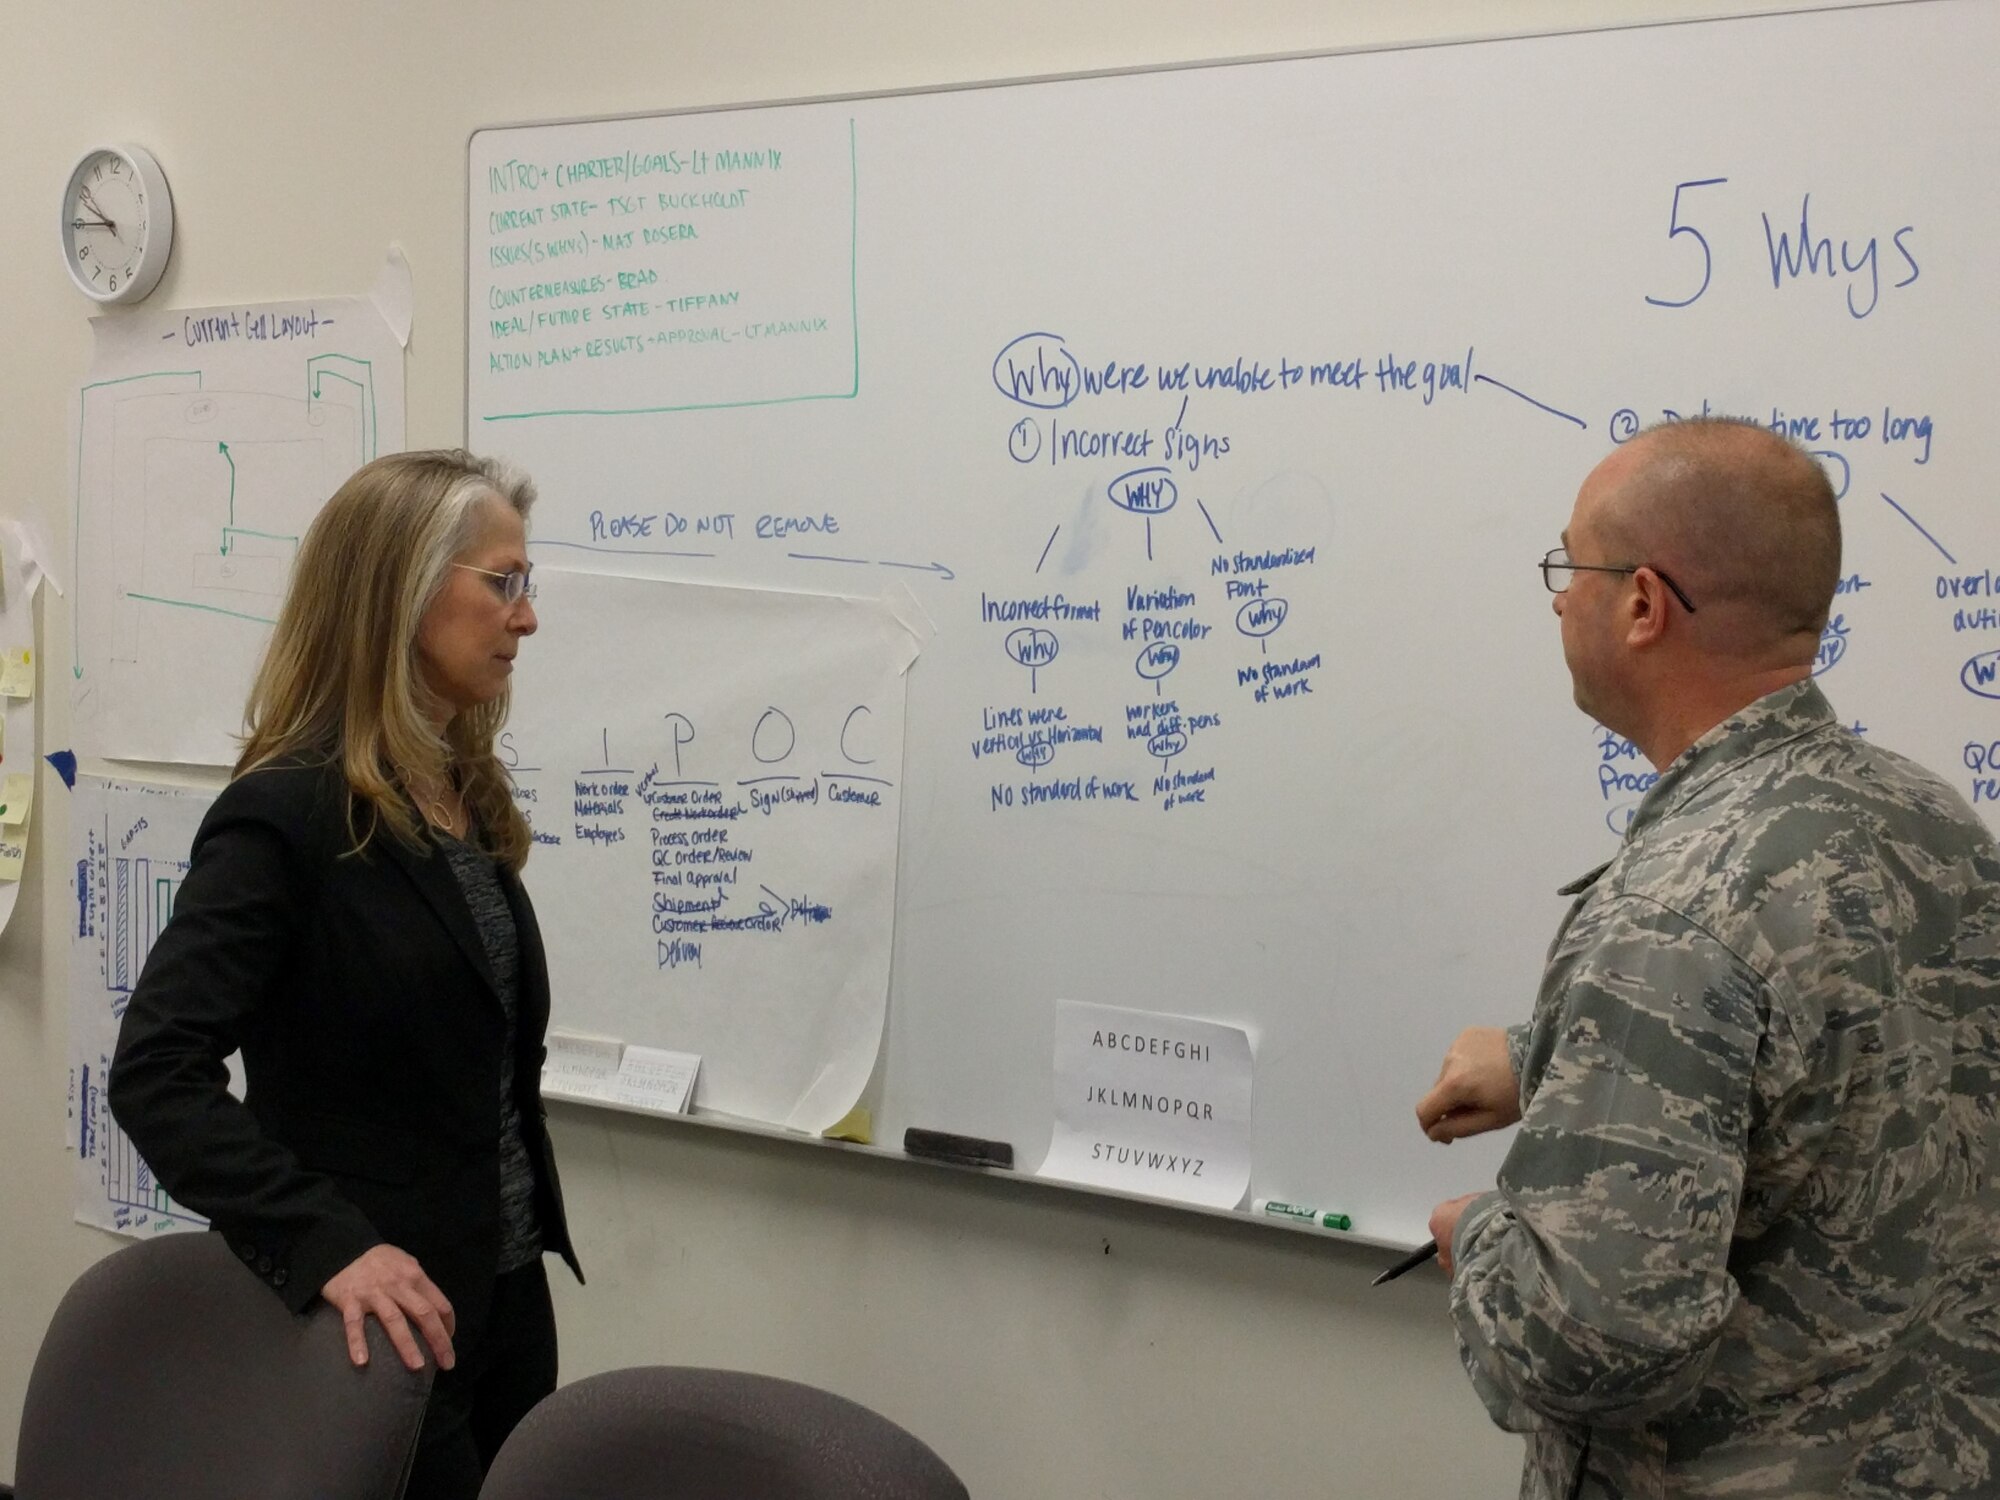 Sandra Speake, the master process officer for Air Force Materiel Command’s Continuous Process Improvement effort discusses a team out-brief with Maj. Daniel Rosera during a recent CPI seminar. The objective is to enable all Airmen to eliminate waste and maximize customer value through the application of several widely accepted process improvement methodologies.(Contributed photo)